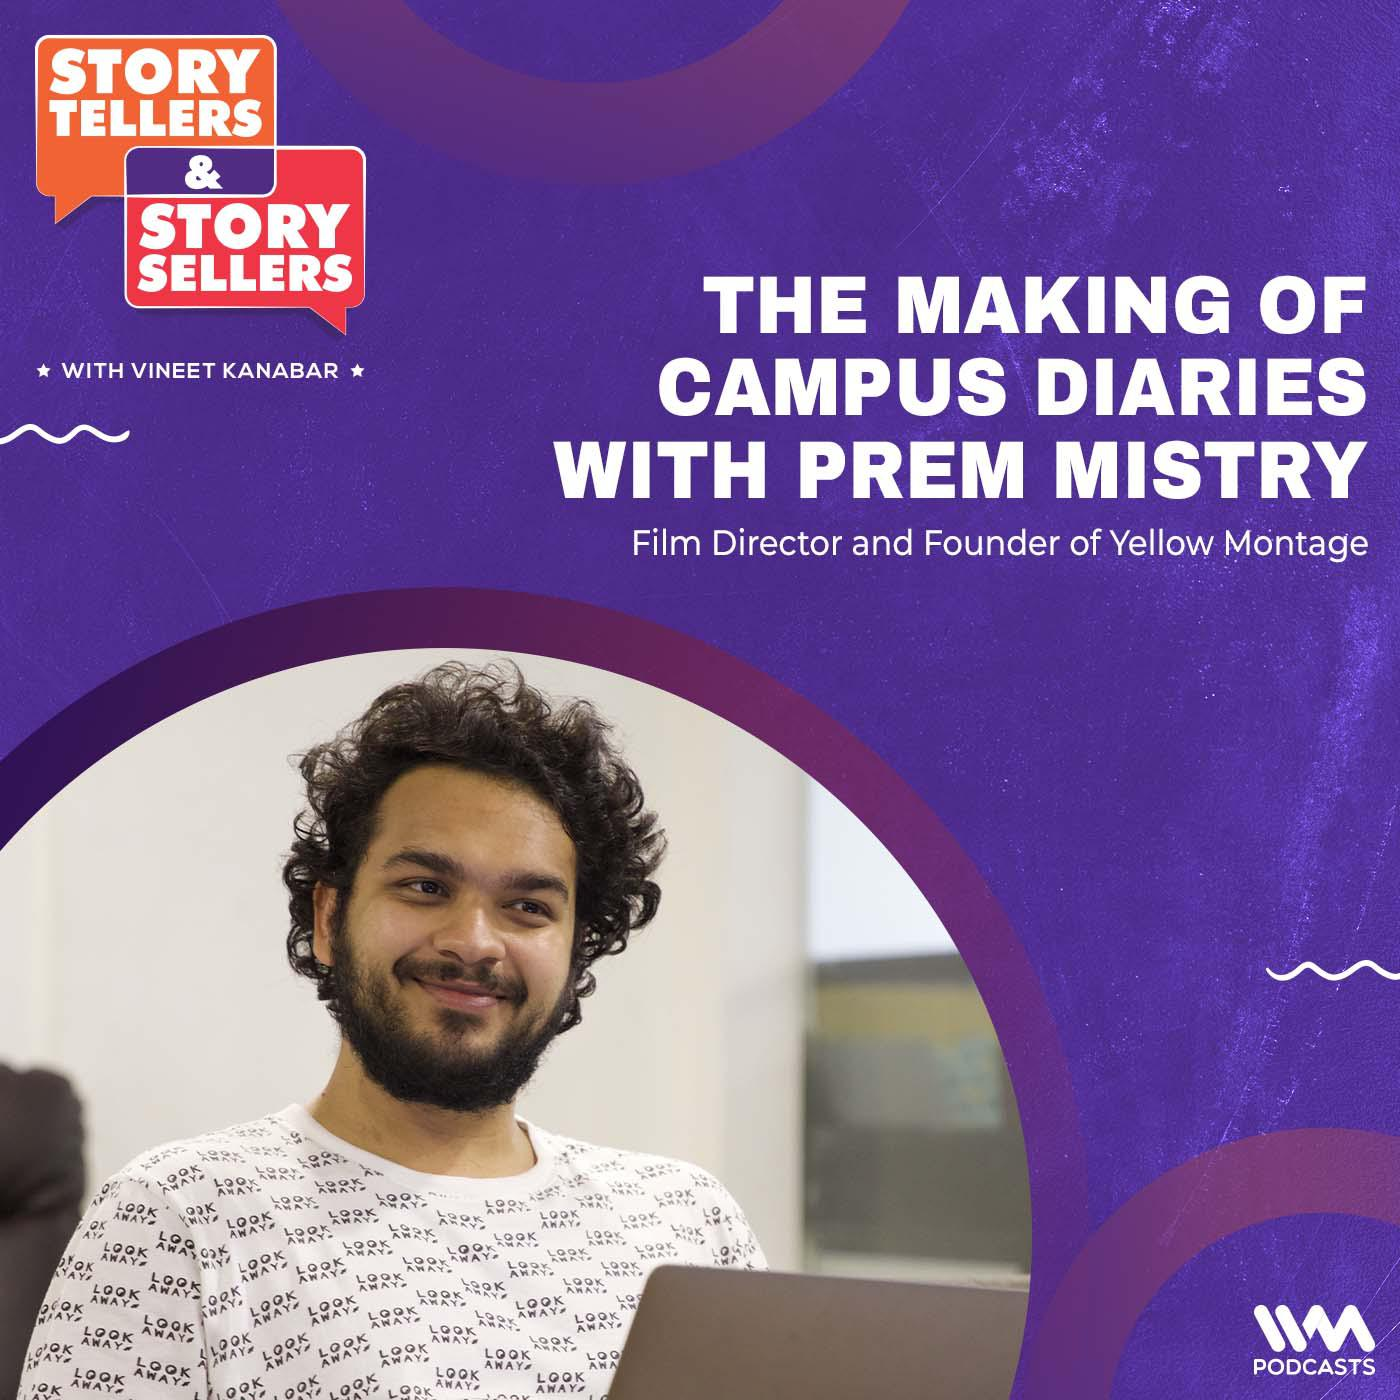 The Making of Campus Diaries with Prem Mistry